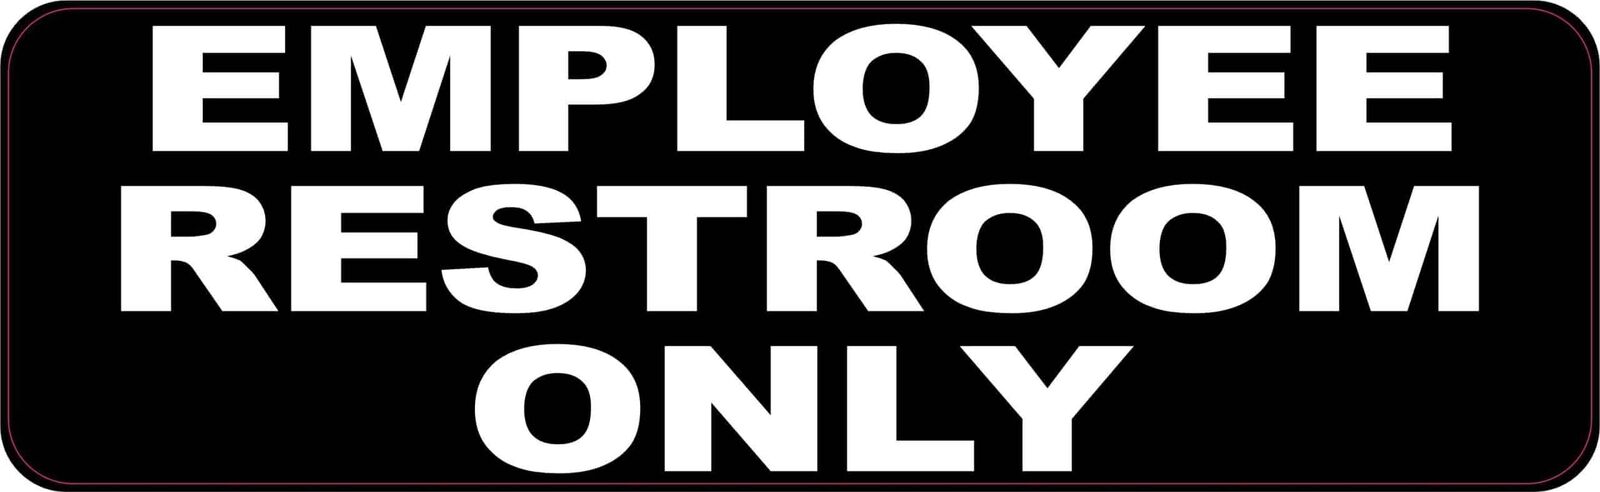 StickerTalk Employee Restroom Only Sticker, 10 inches by 3 inches